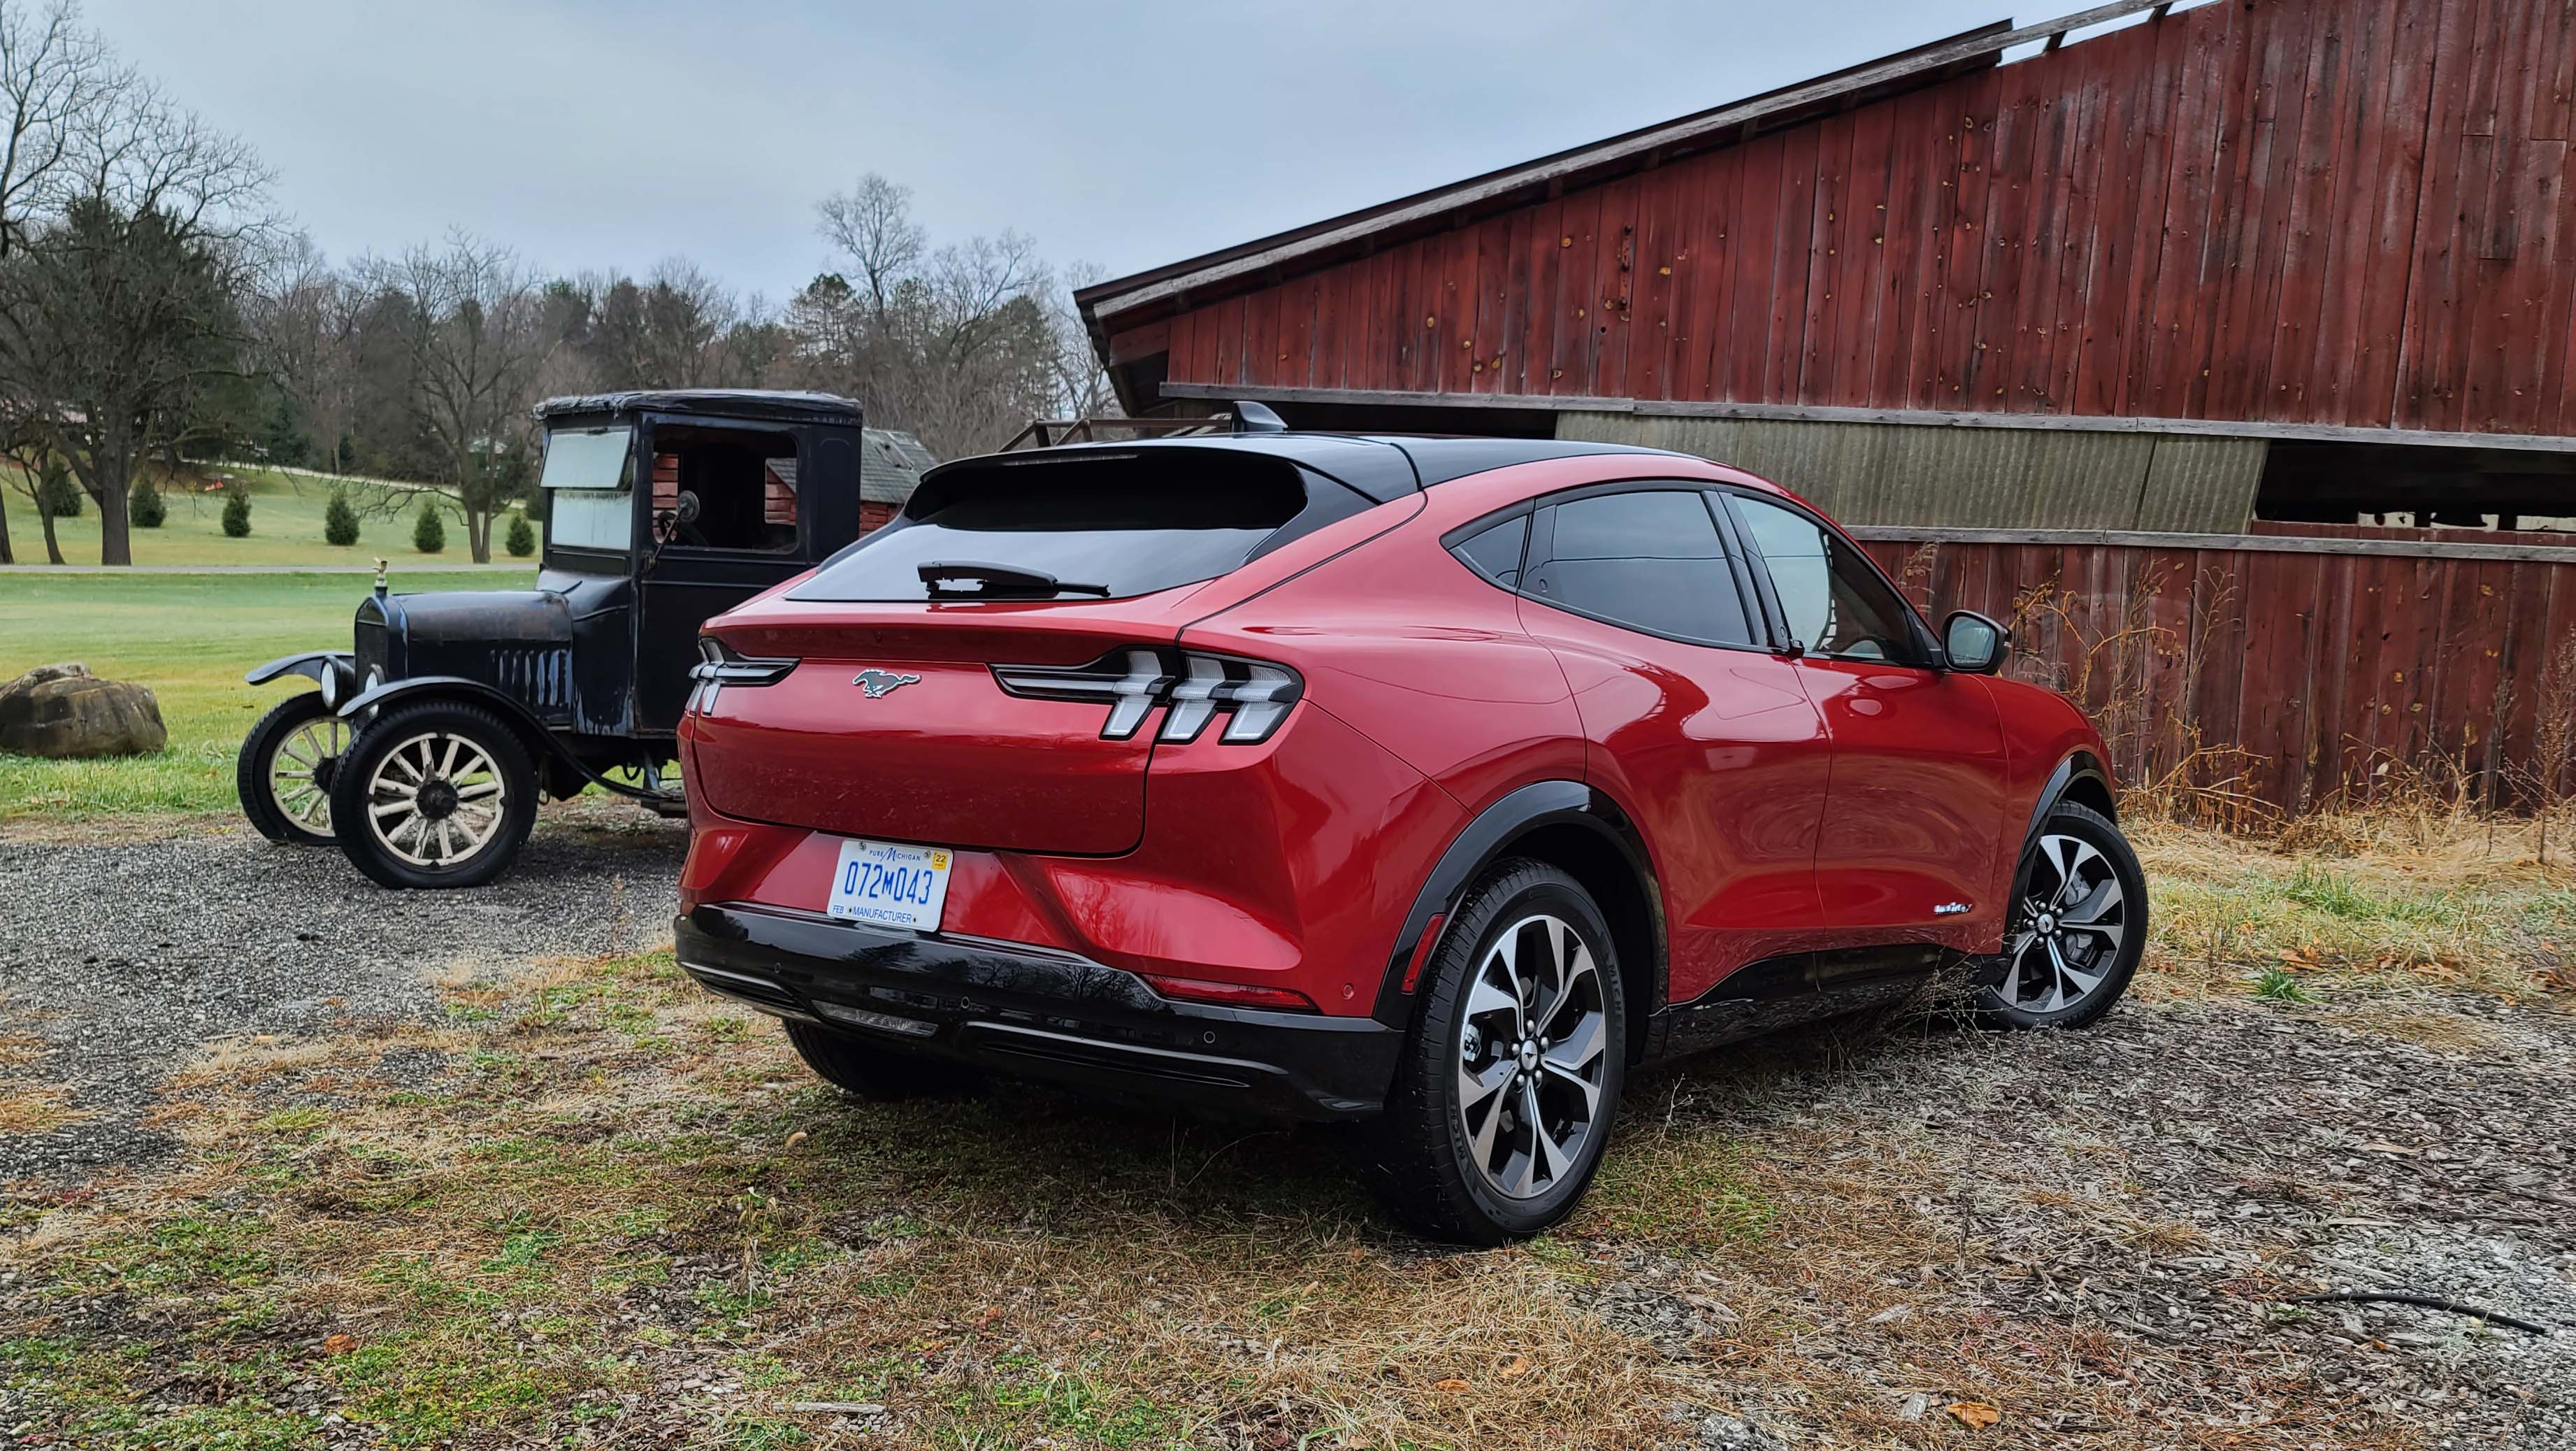 The first Mustang SUV, the 2021 Ford Mustang Mach-E features signature Mustang touches like six-slot taillights.